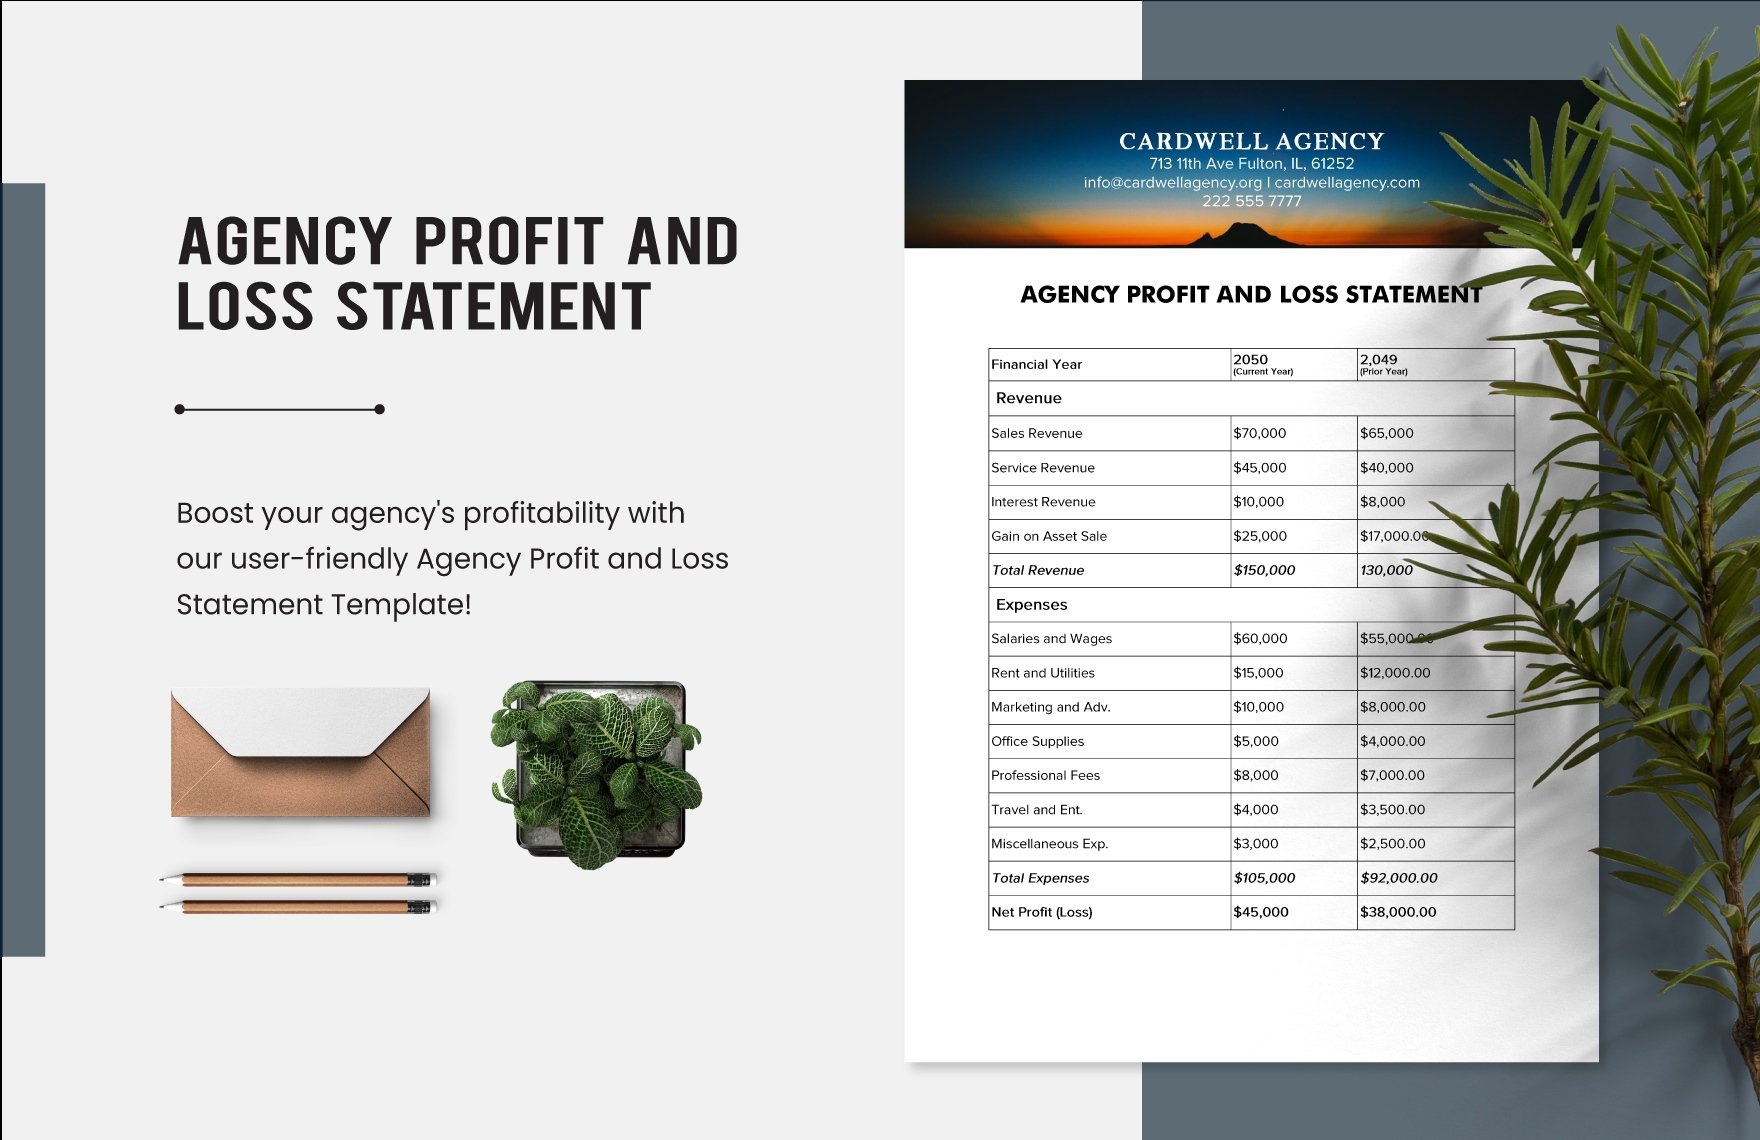 Agency Profit and Loss Statement Template